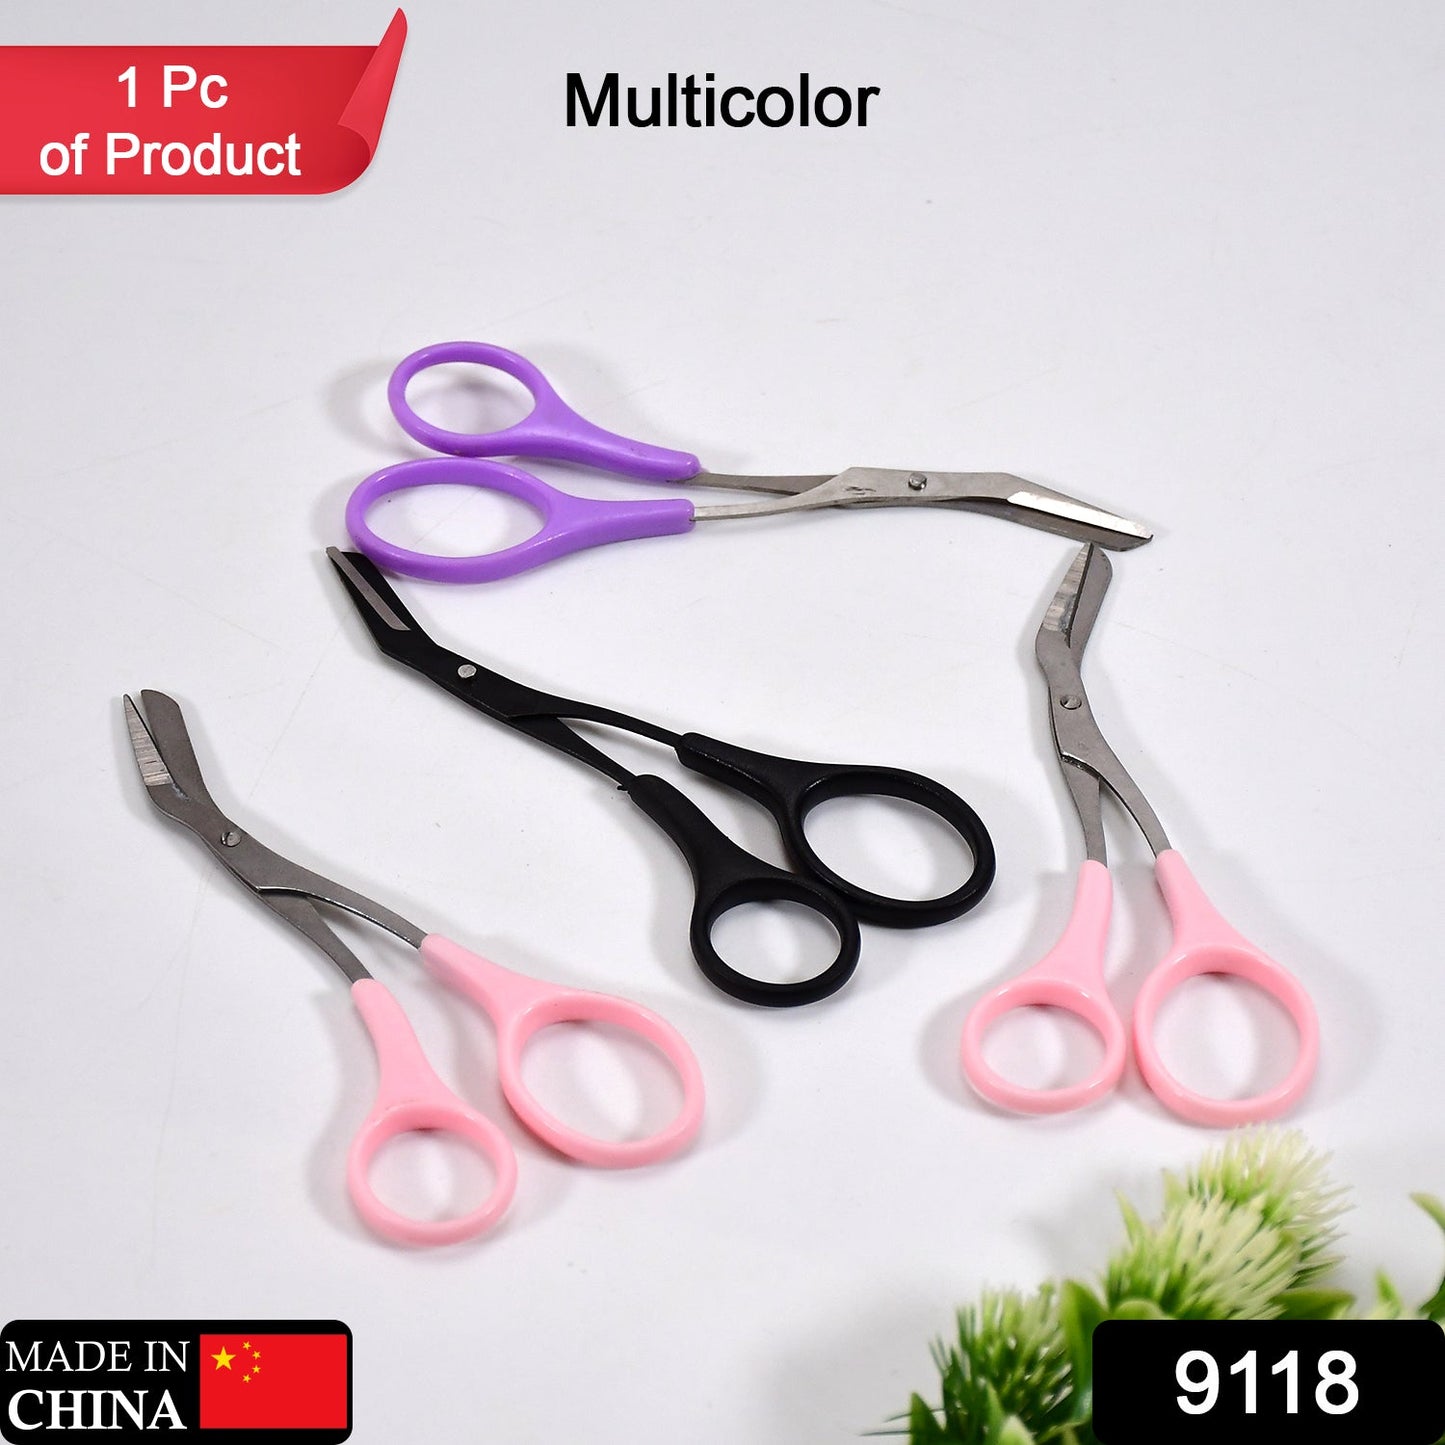 9118 Stainless Steel Eyebrow Grooming Shear Scissors, Hair Removal Shaper Shaping Tool Makeup Beauty Accessories for Men and Women Dukandaily